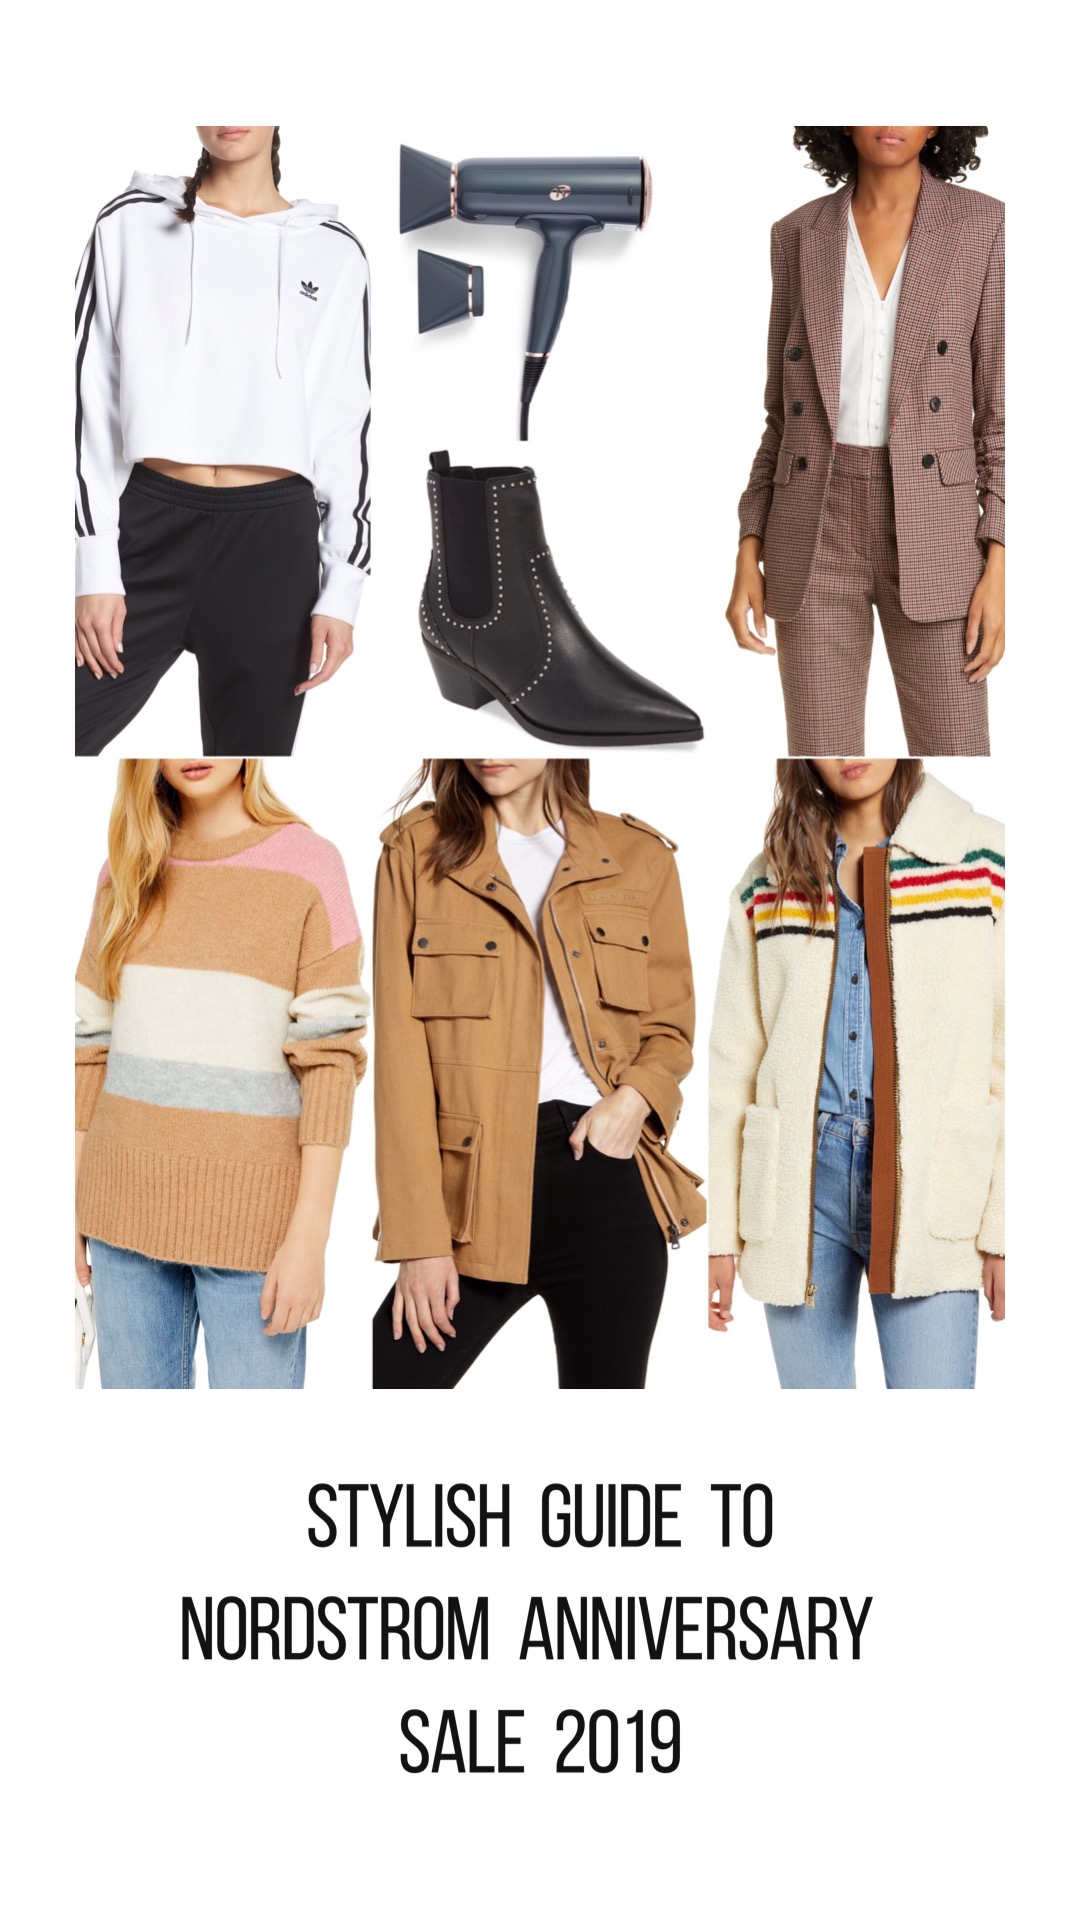 Nordstrom Anniversary Sale 2019 Stylish guide and designer pieces